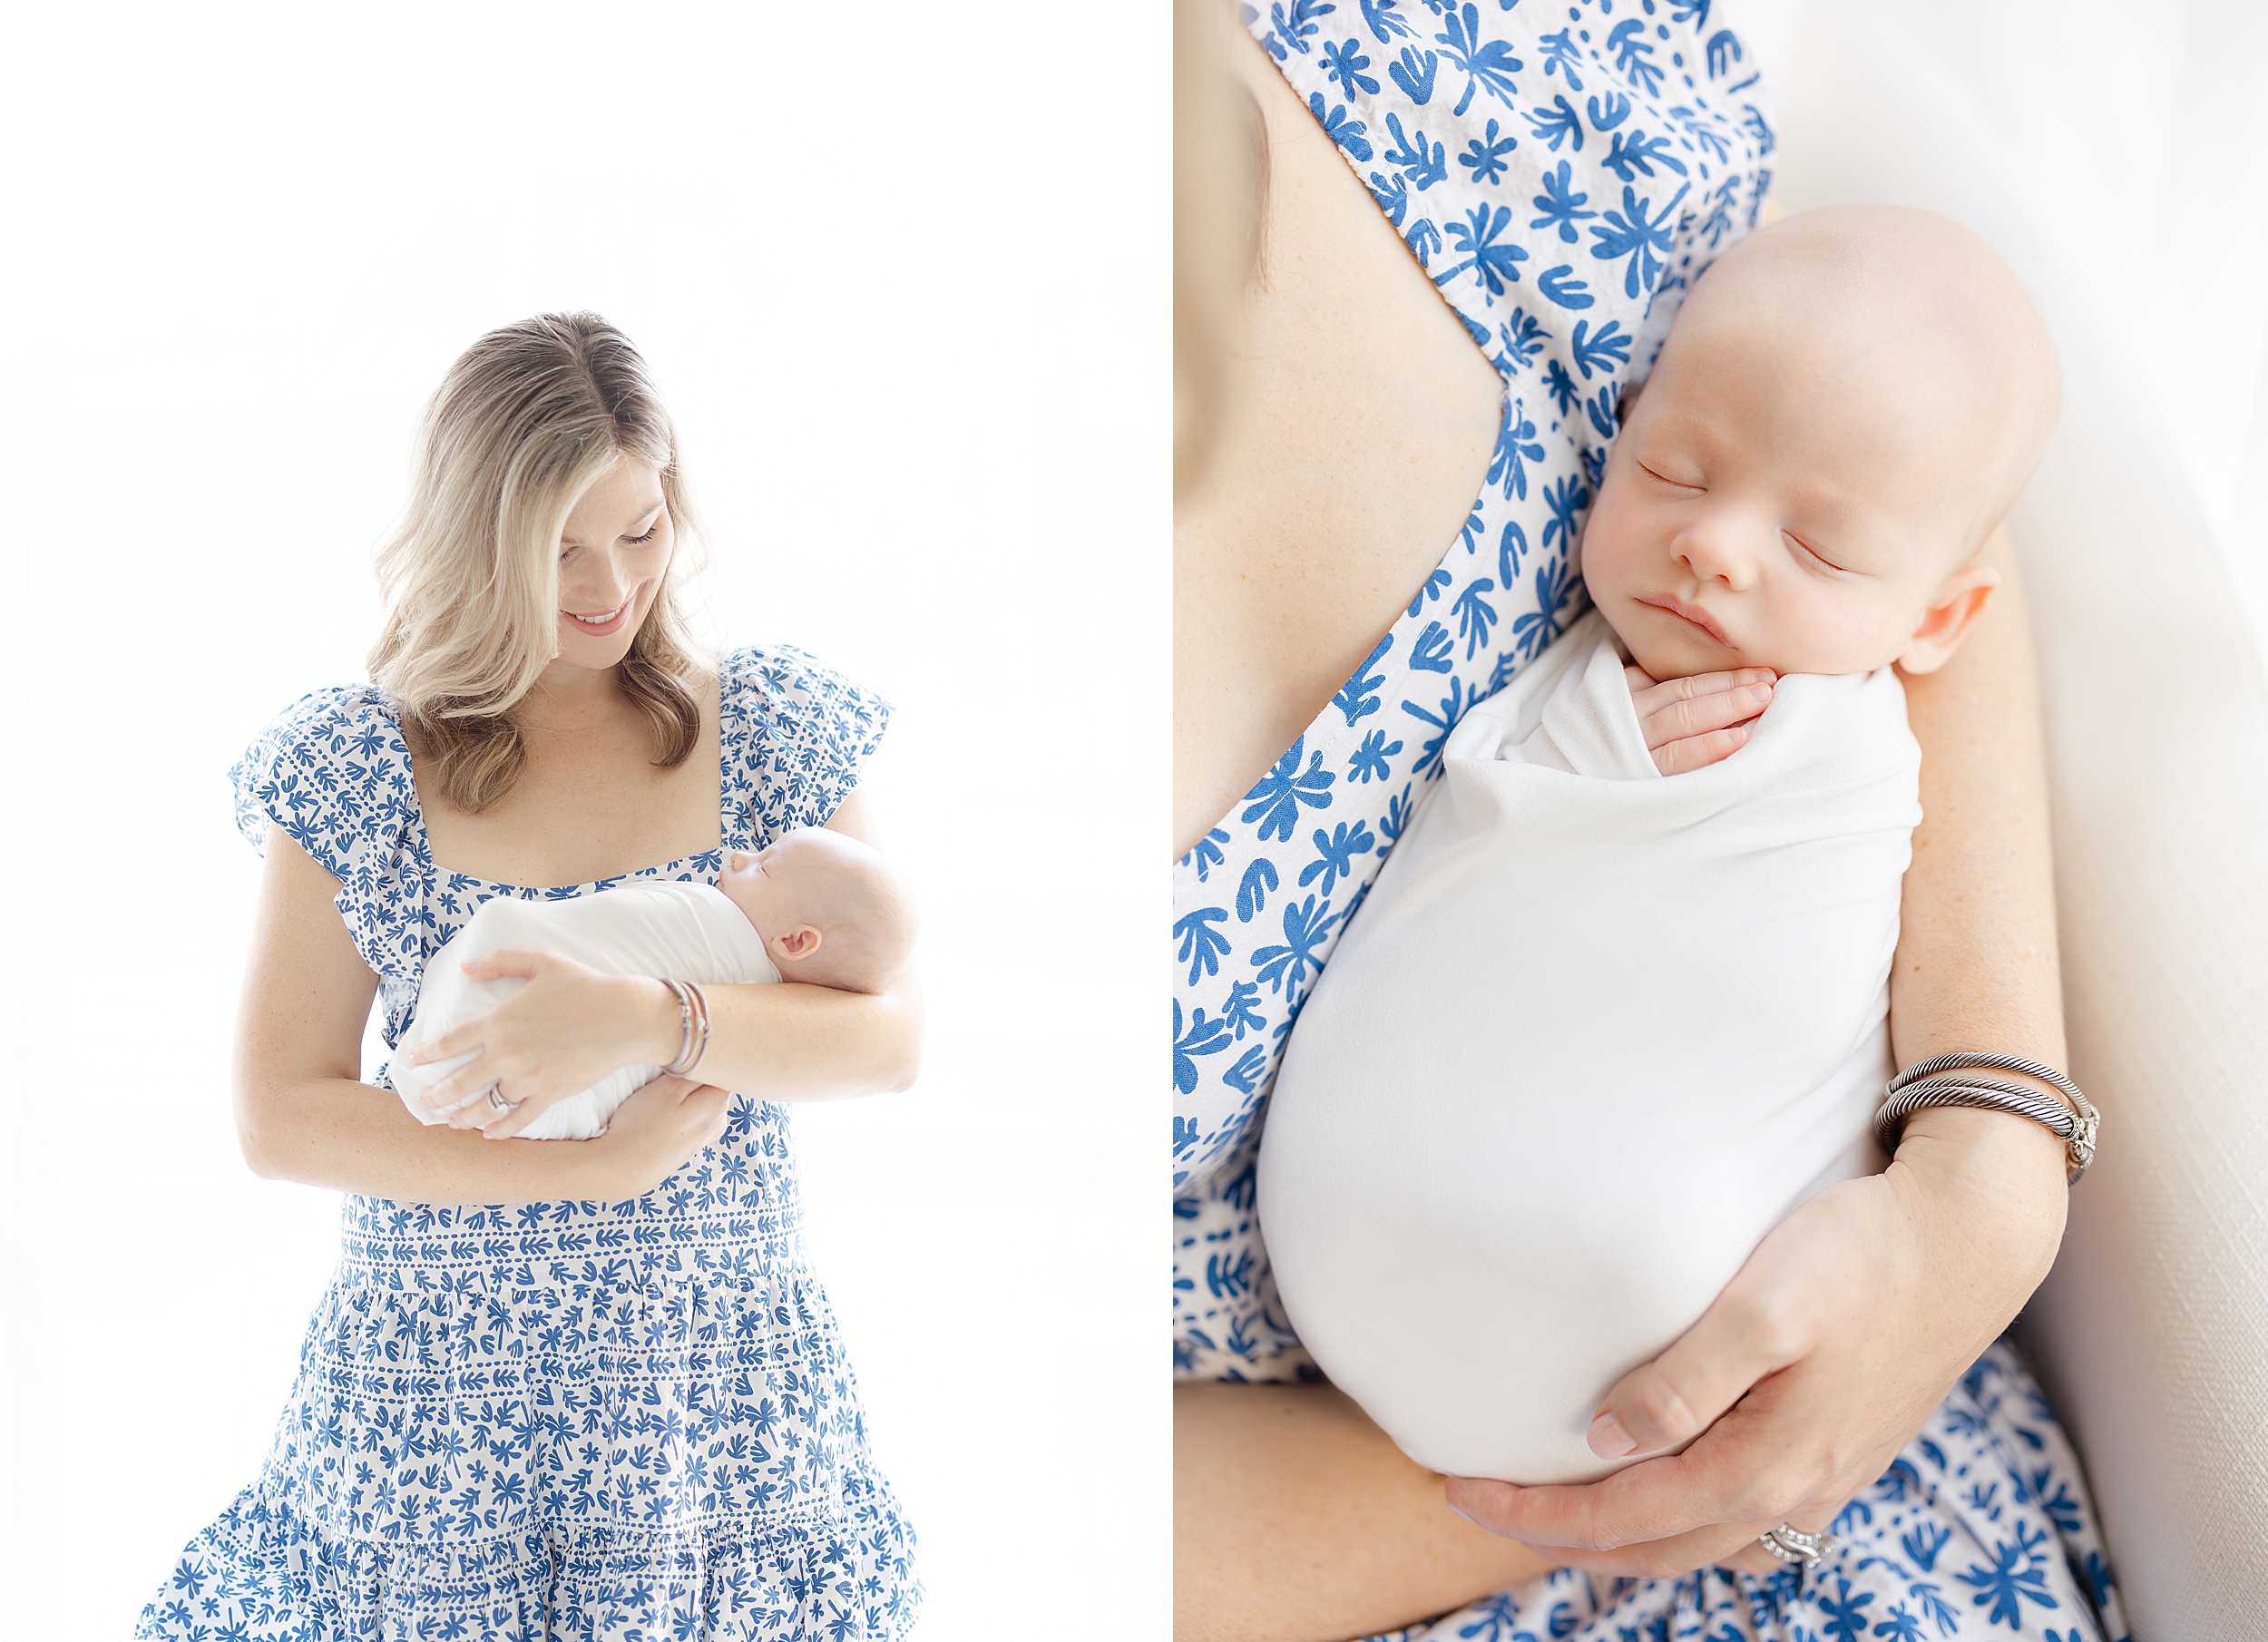 Light filled newborn portrait of baby boy and his mother.